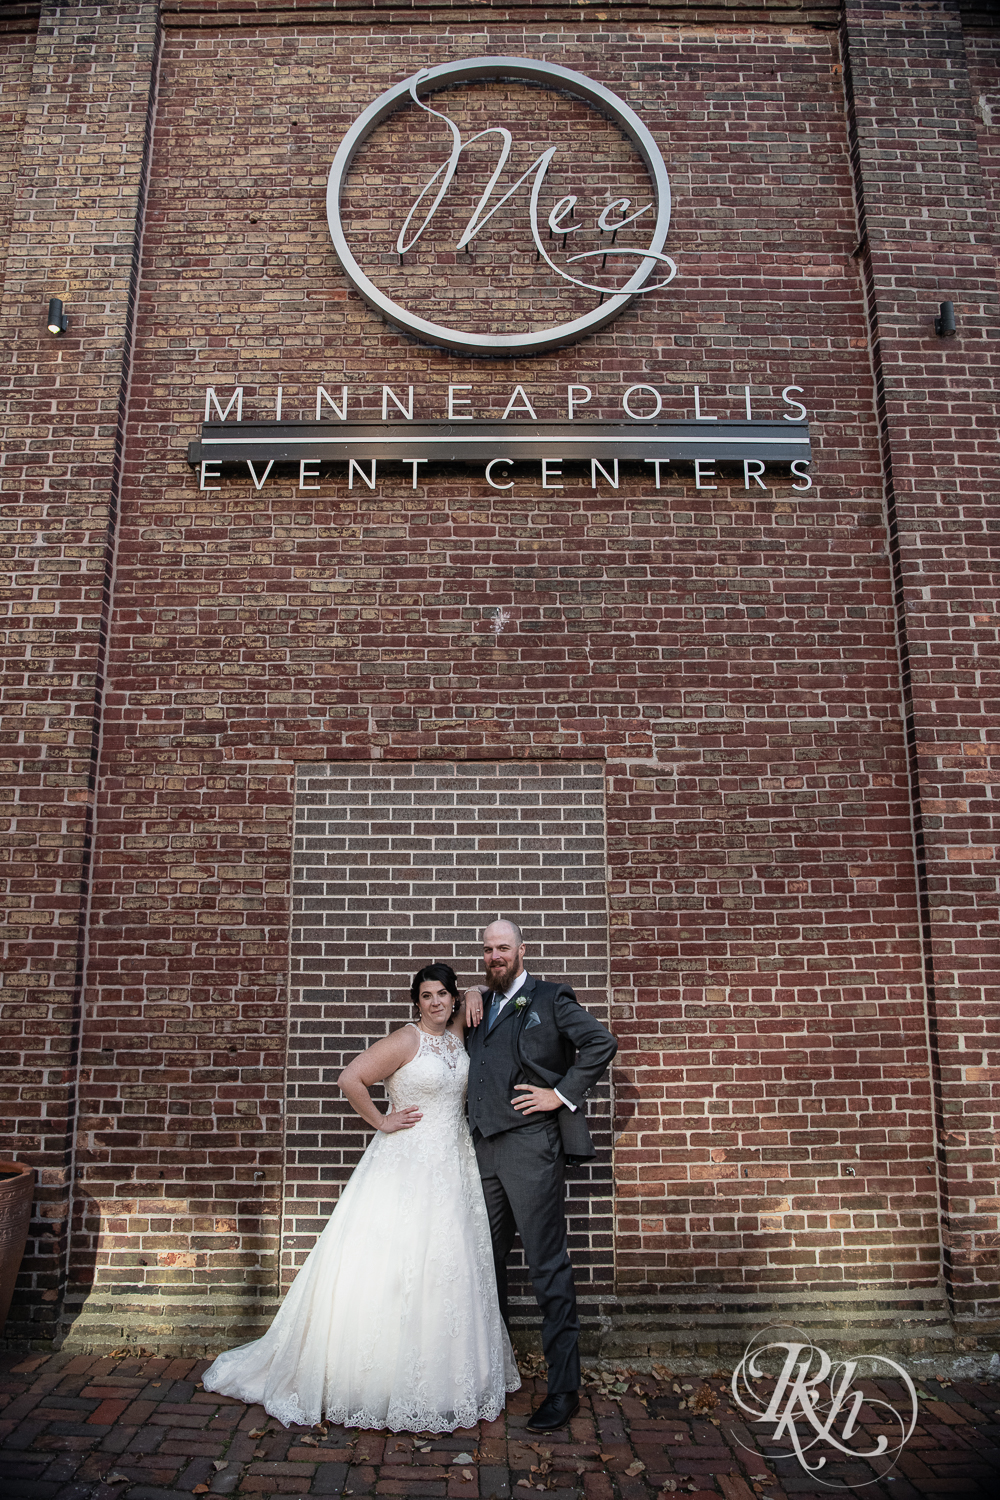 Bride and groom kiss in front of Minneapolis Event Centers in Minneapolis, Minnesota.